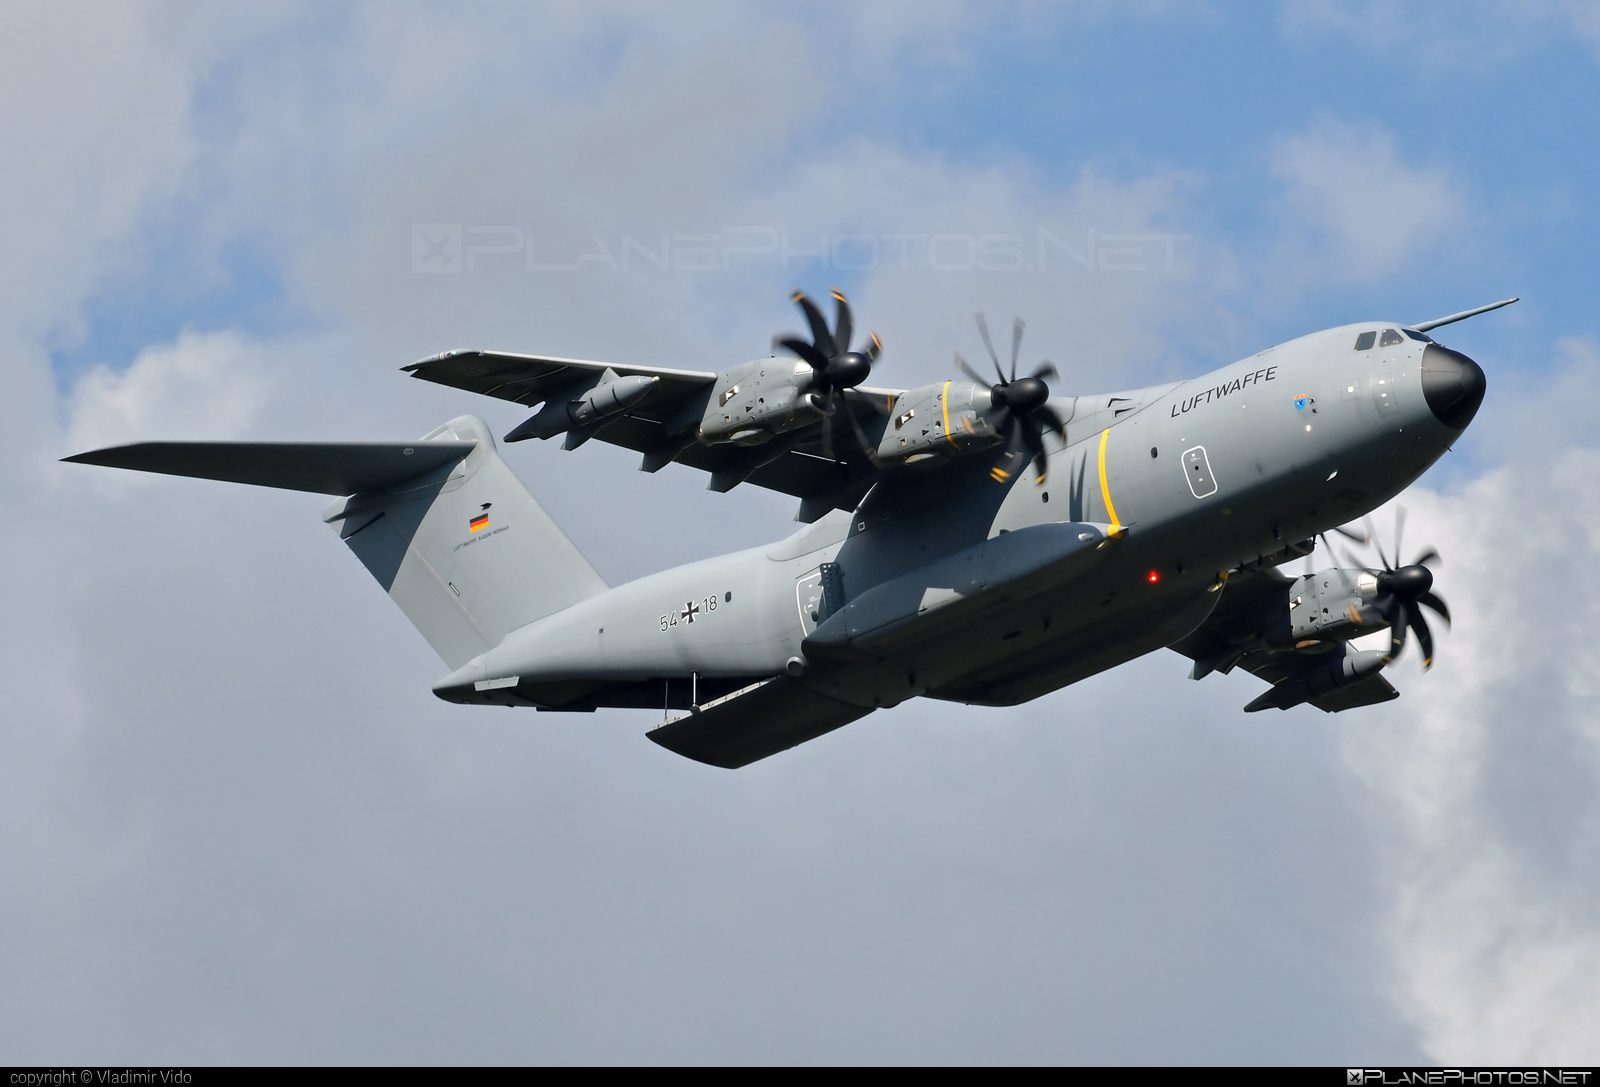 Airbus A400M Atlas - 54+18 operated by Luftwaffe (German Air Force) #GermanAirForce #a400 #a400m #airbus #airbusa400m #luftwaffe